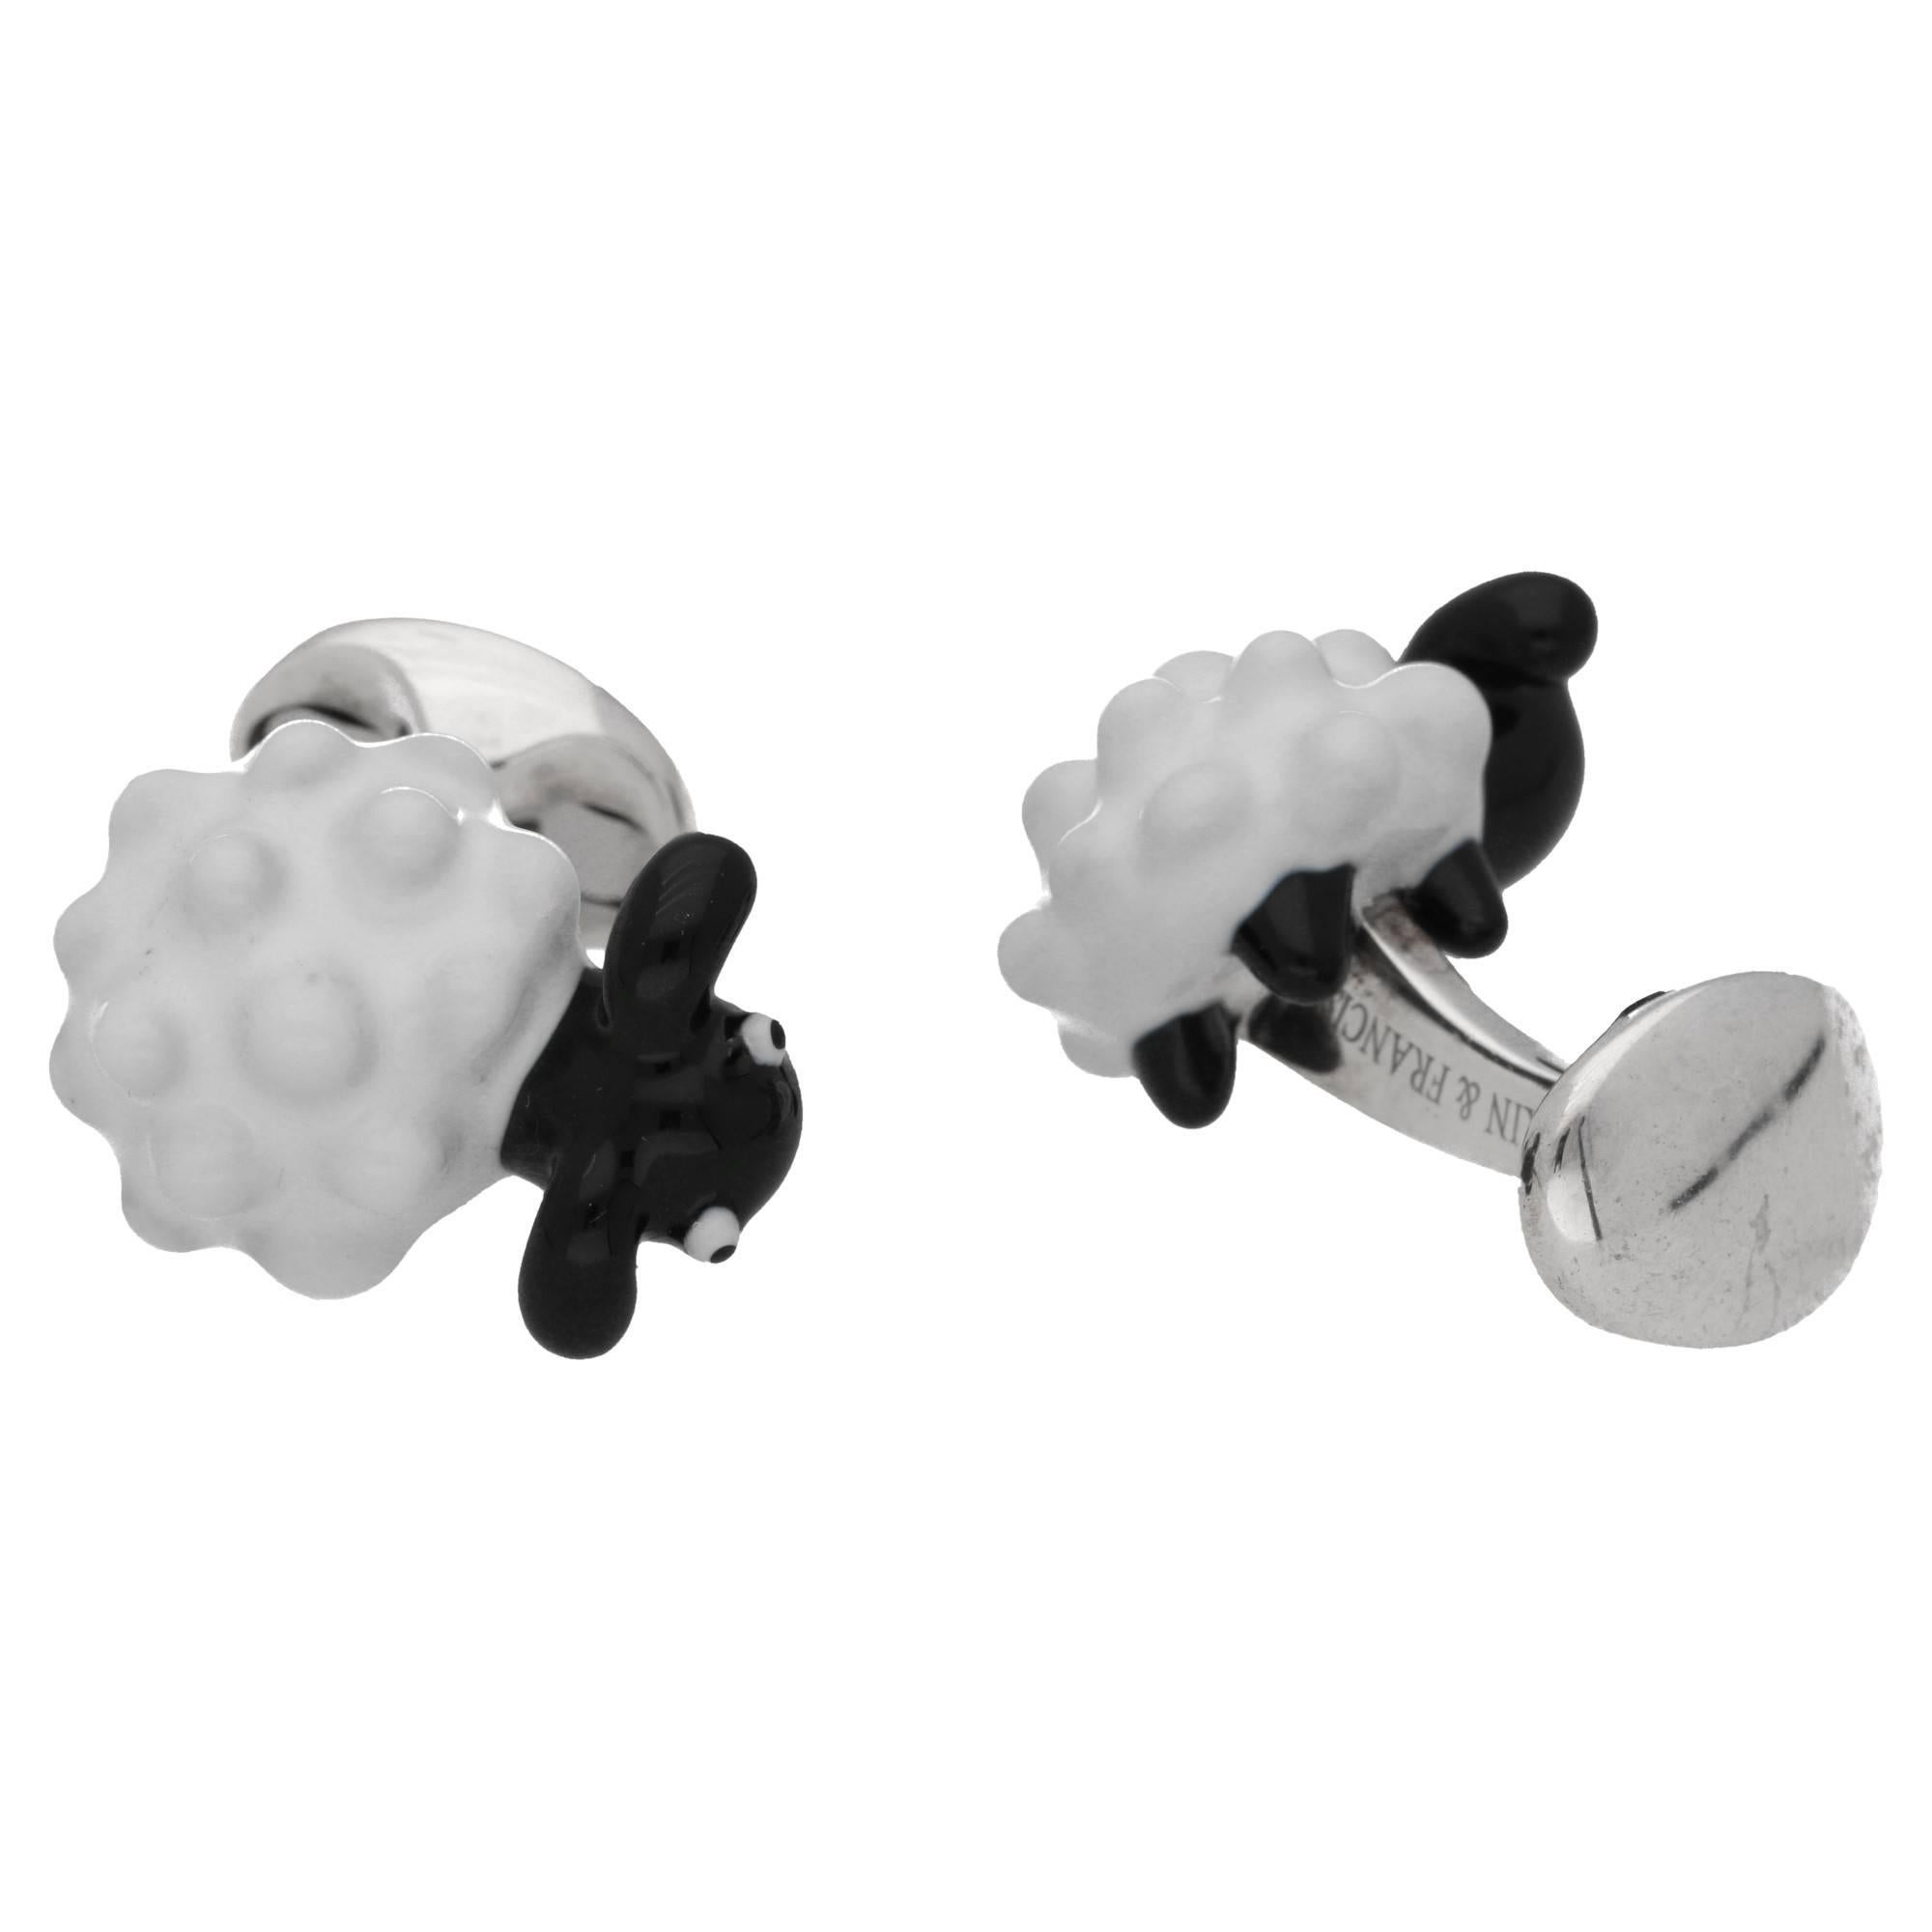 A pair of British .925 Sterling Silver and hand painted enamel sheep cufflinks, set on a small domed oval spring link fitting.
The fundamental techniques of enamel are cloisonné, champlevé and painted enamel. Enameling is glass fused to metal at